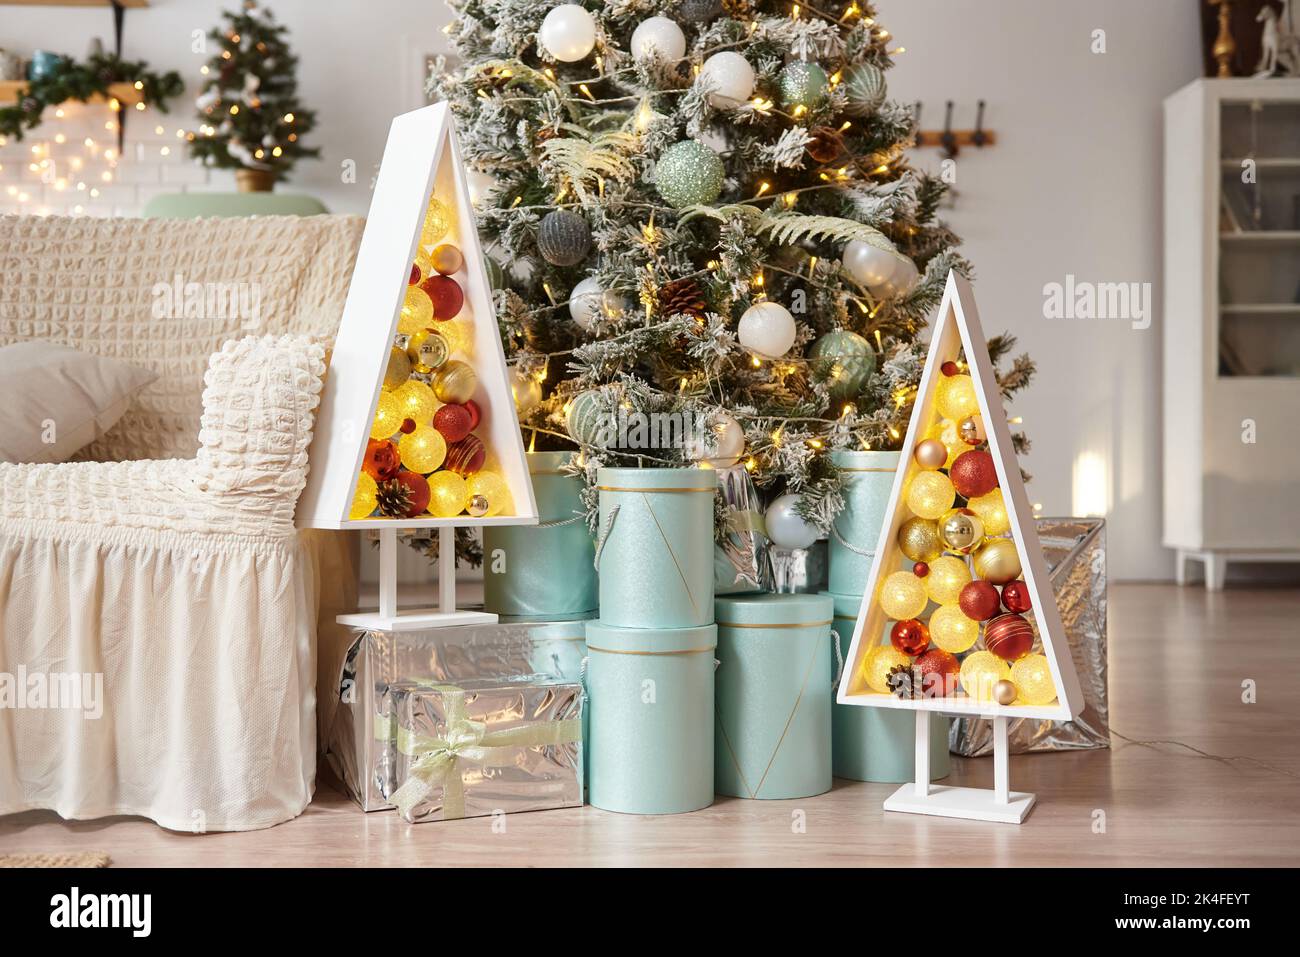 Christmas cozy living room interior with wooden Christmas tree. Stock Photo